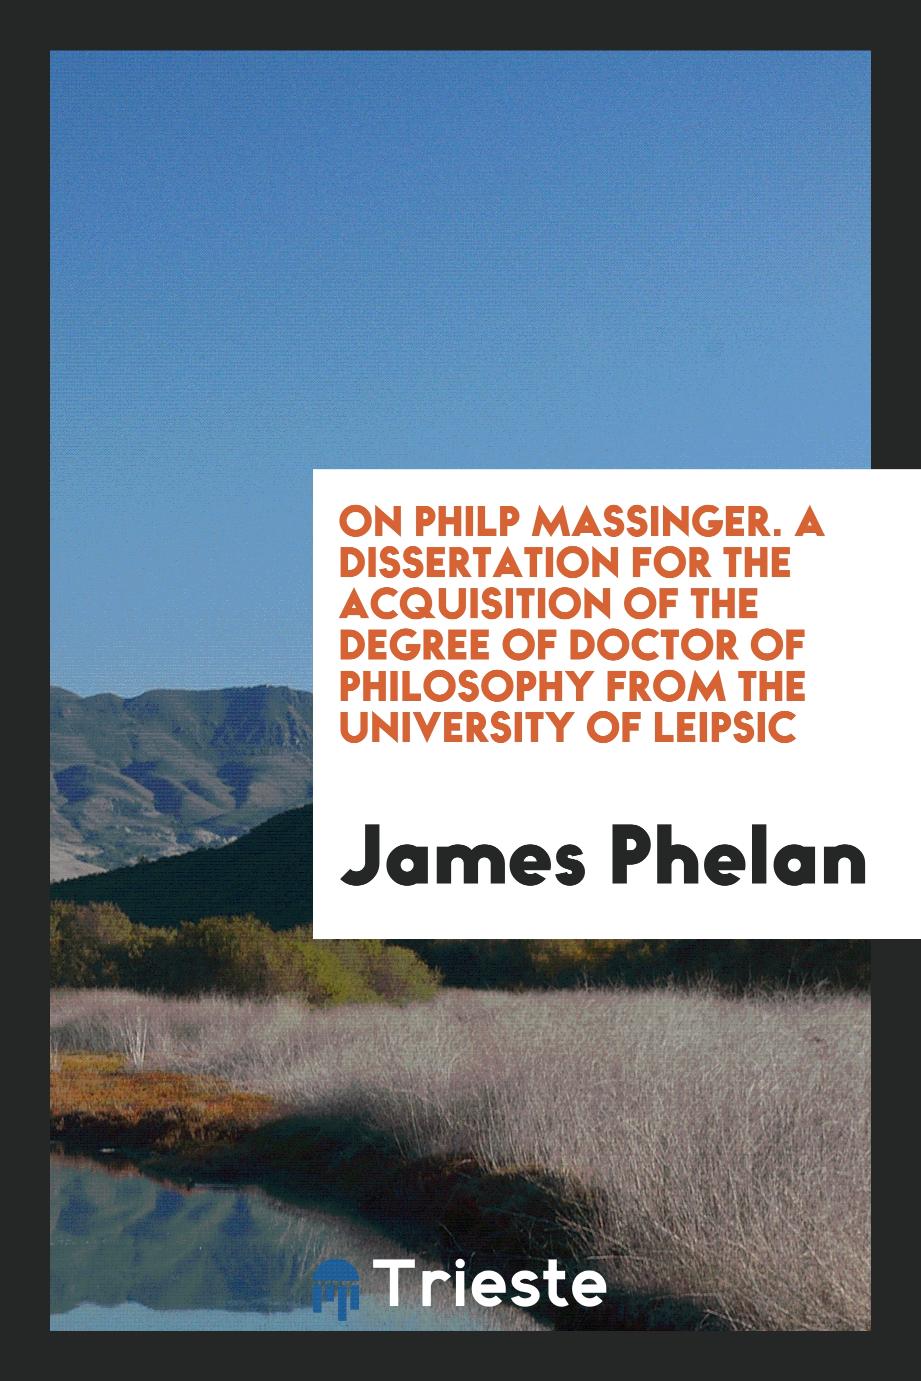 On Philp Massinger. A dissertation for the acquisition of the degree of doctor of philosophy from the university of leipsic